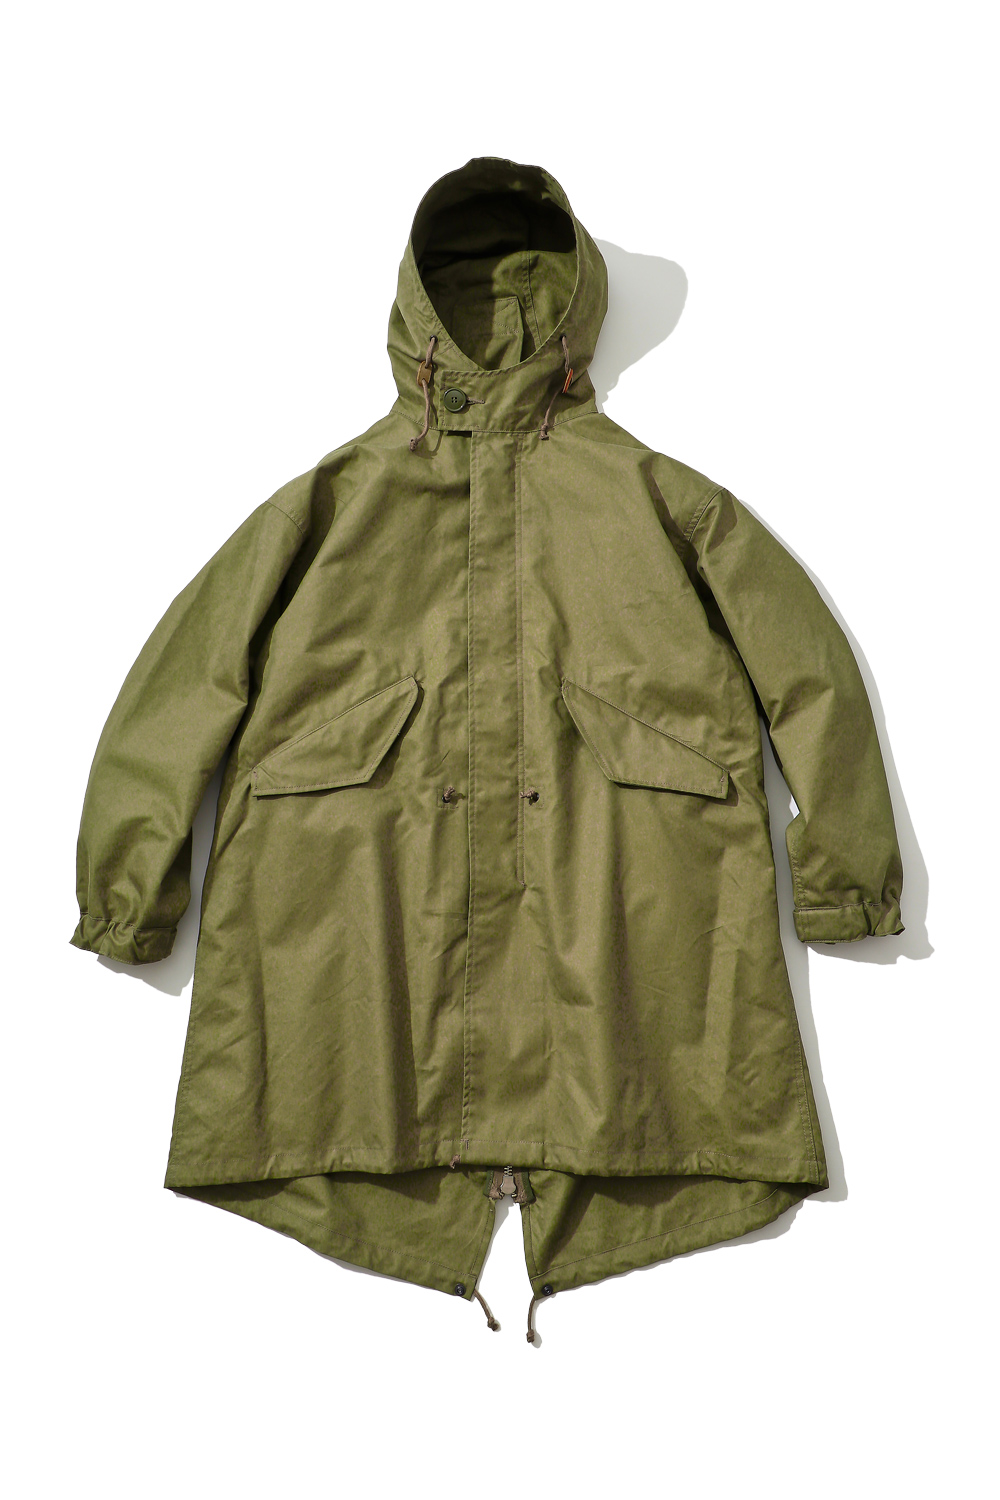 BAMBOO SHOOTS x MOUNTAIN RESEARCH  B.P.’S FISHTAIL PARKA